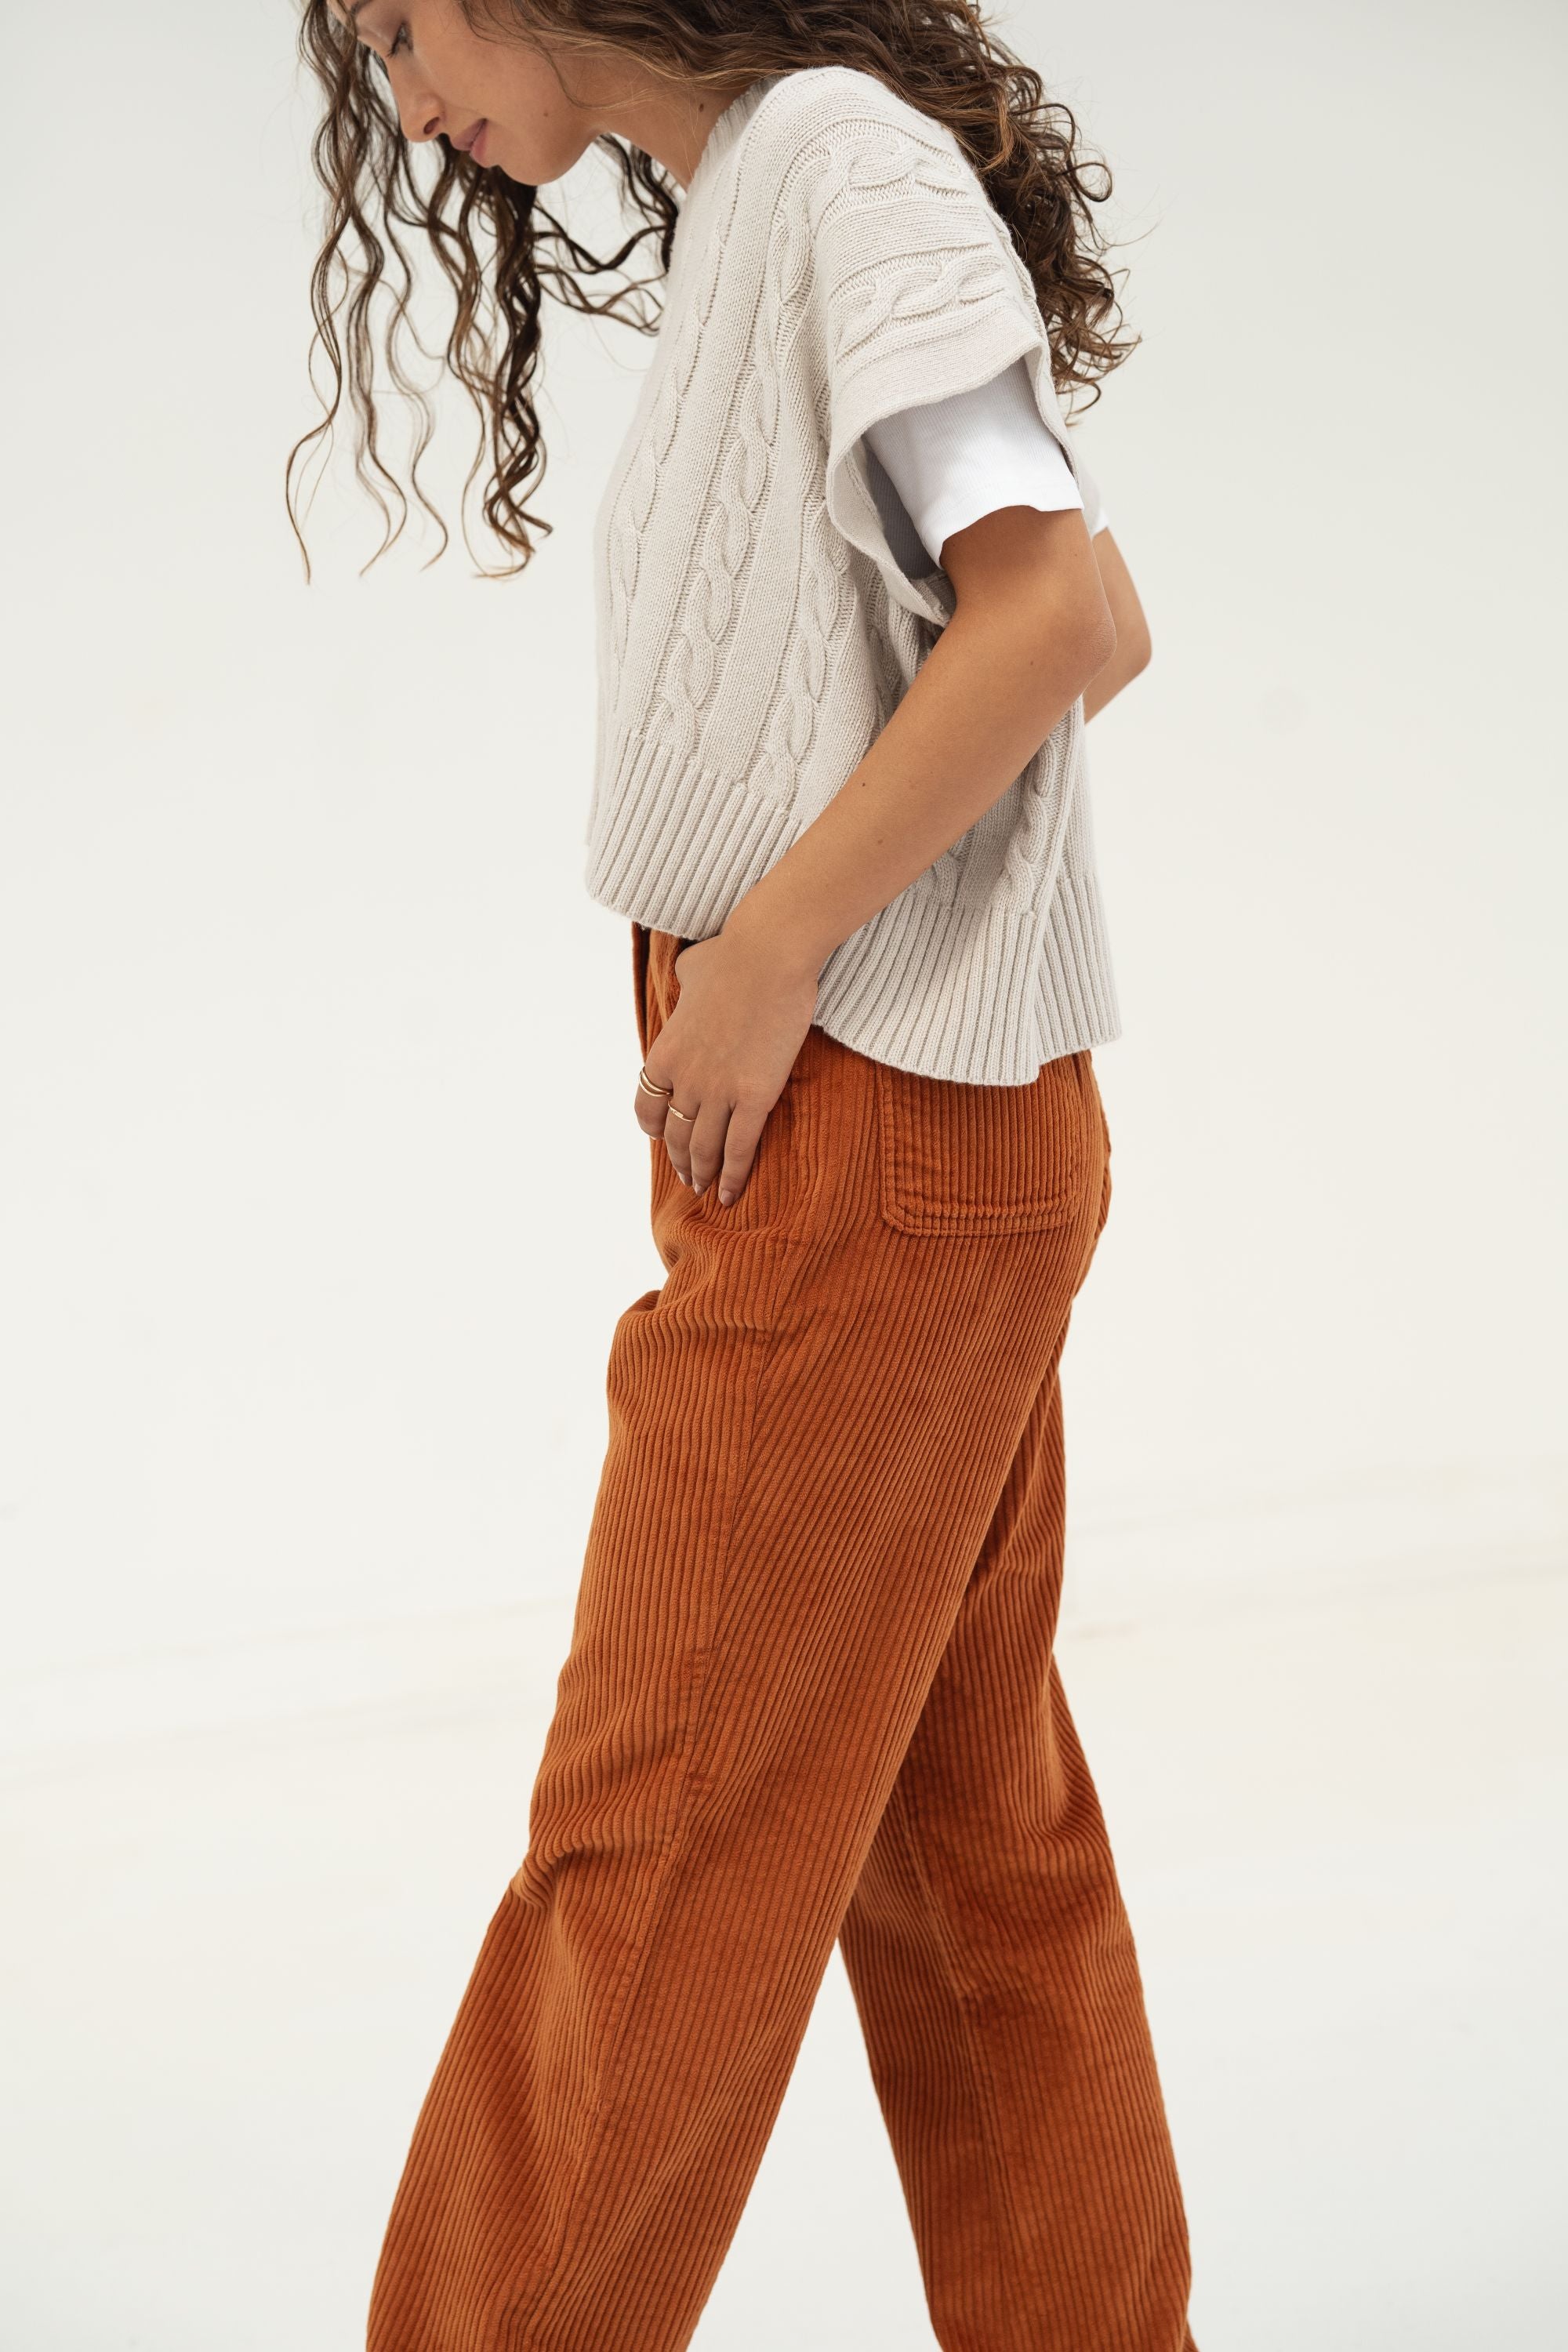 Naz women's high-waisted corduroy cotton pants with elastic on the back.